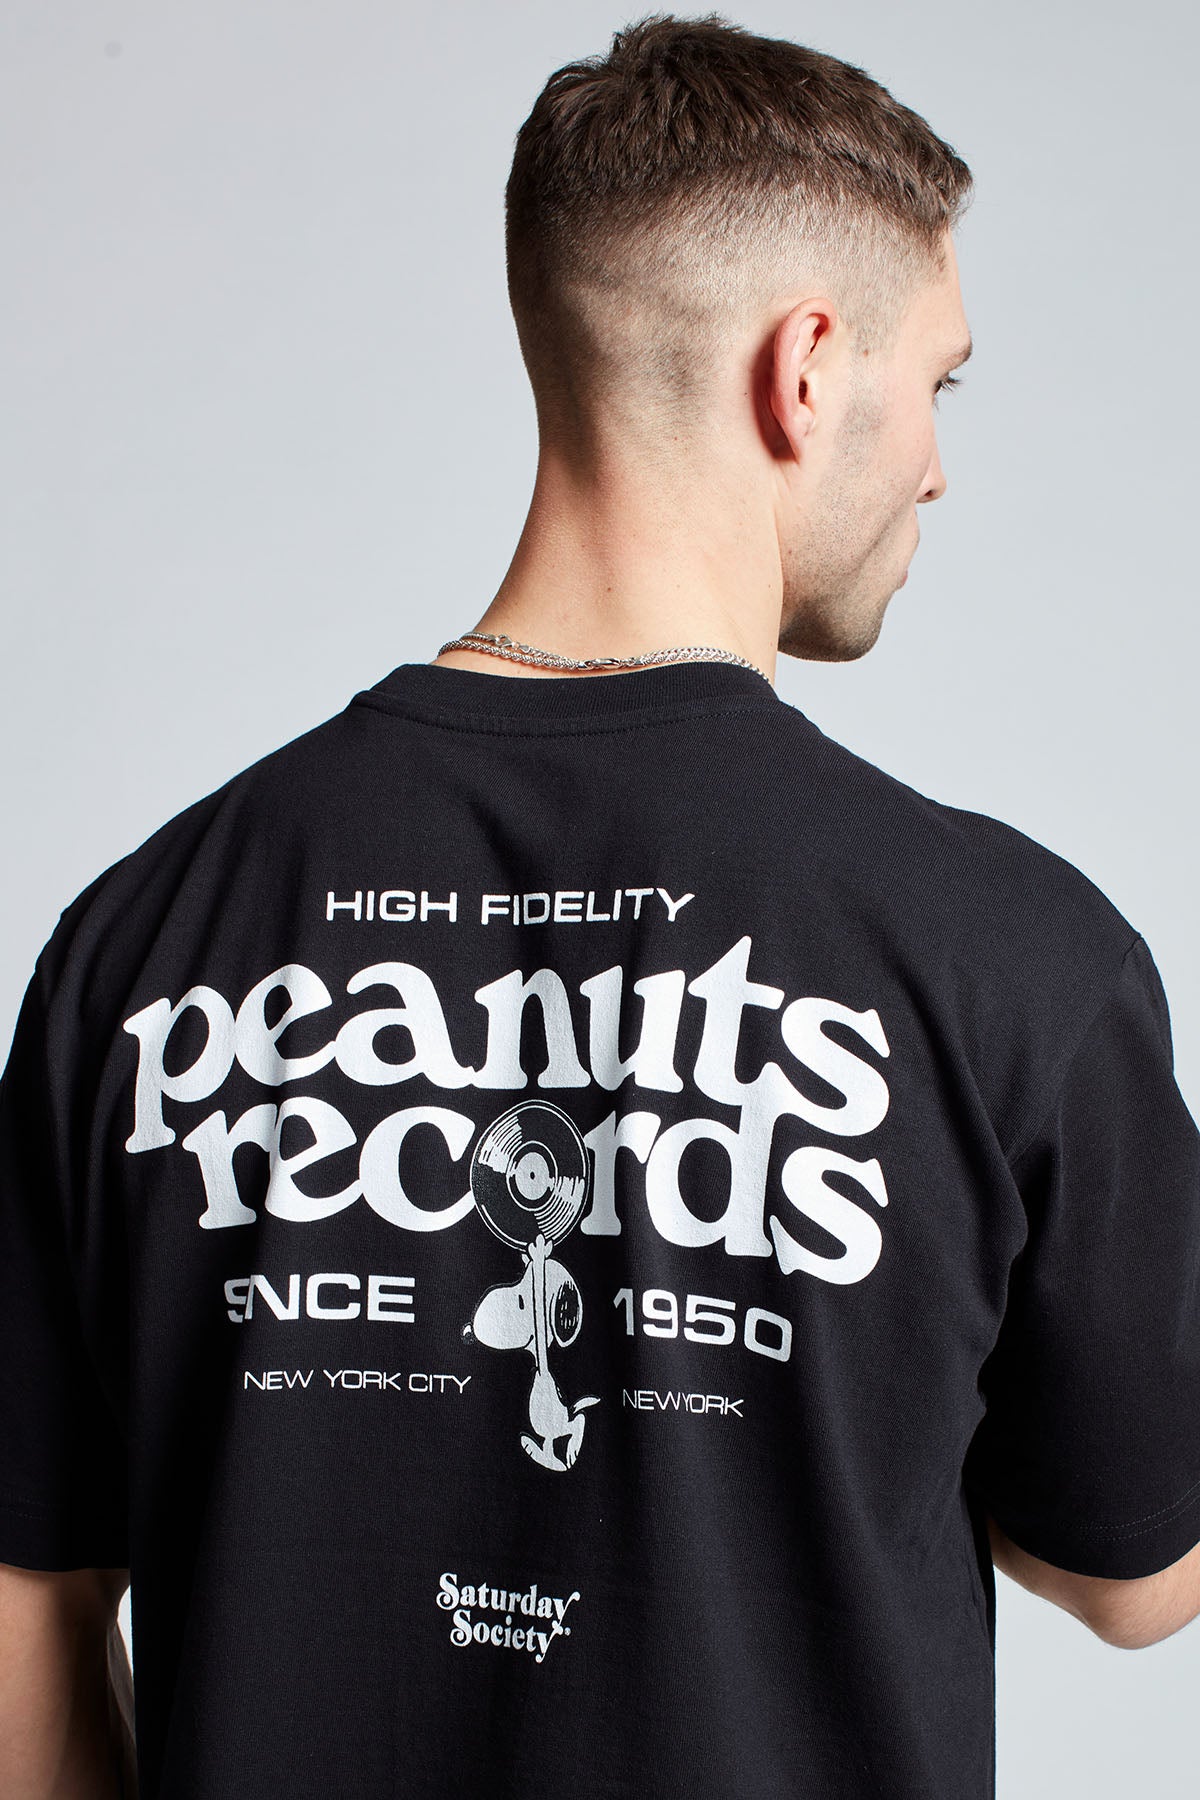 Snoopy Peanuts Records T-shirt in Black